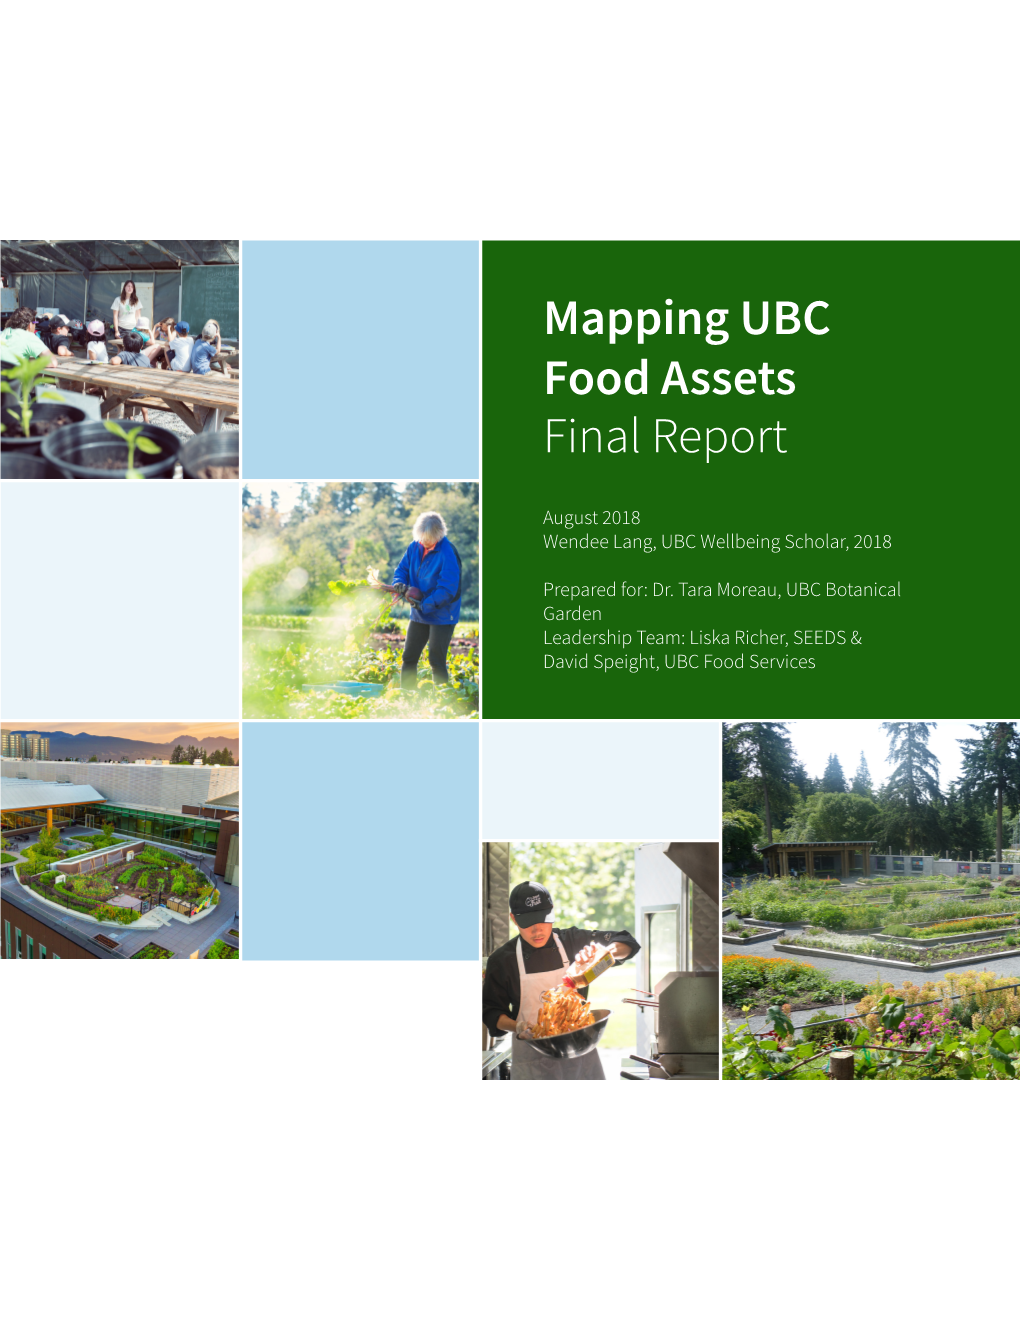 Mapping UBC Food Assets Final Report